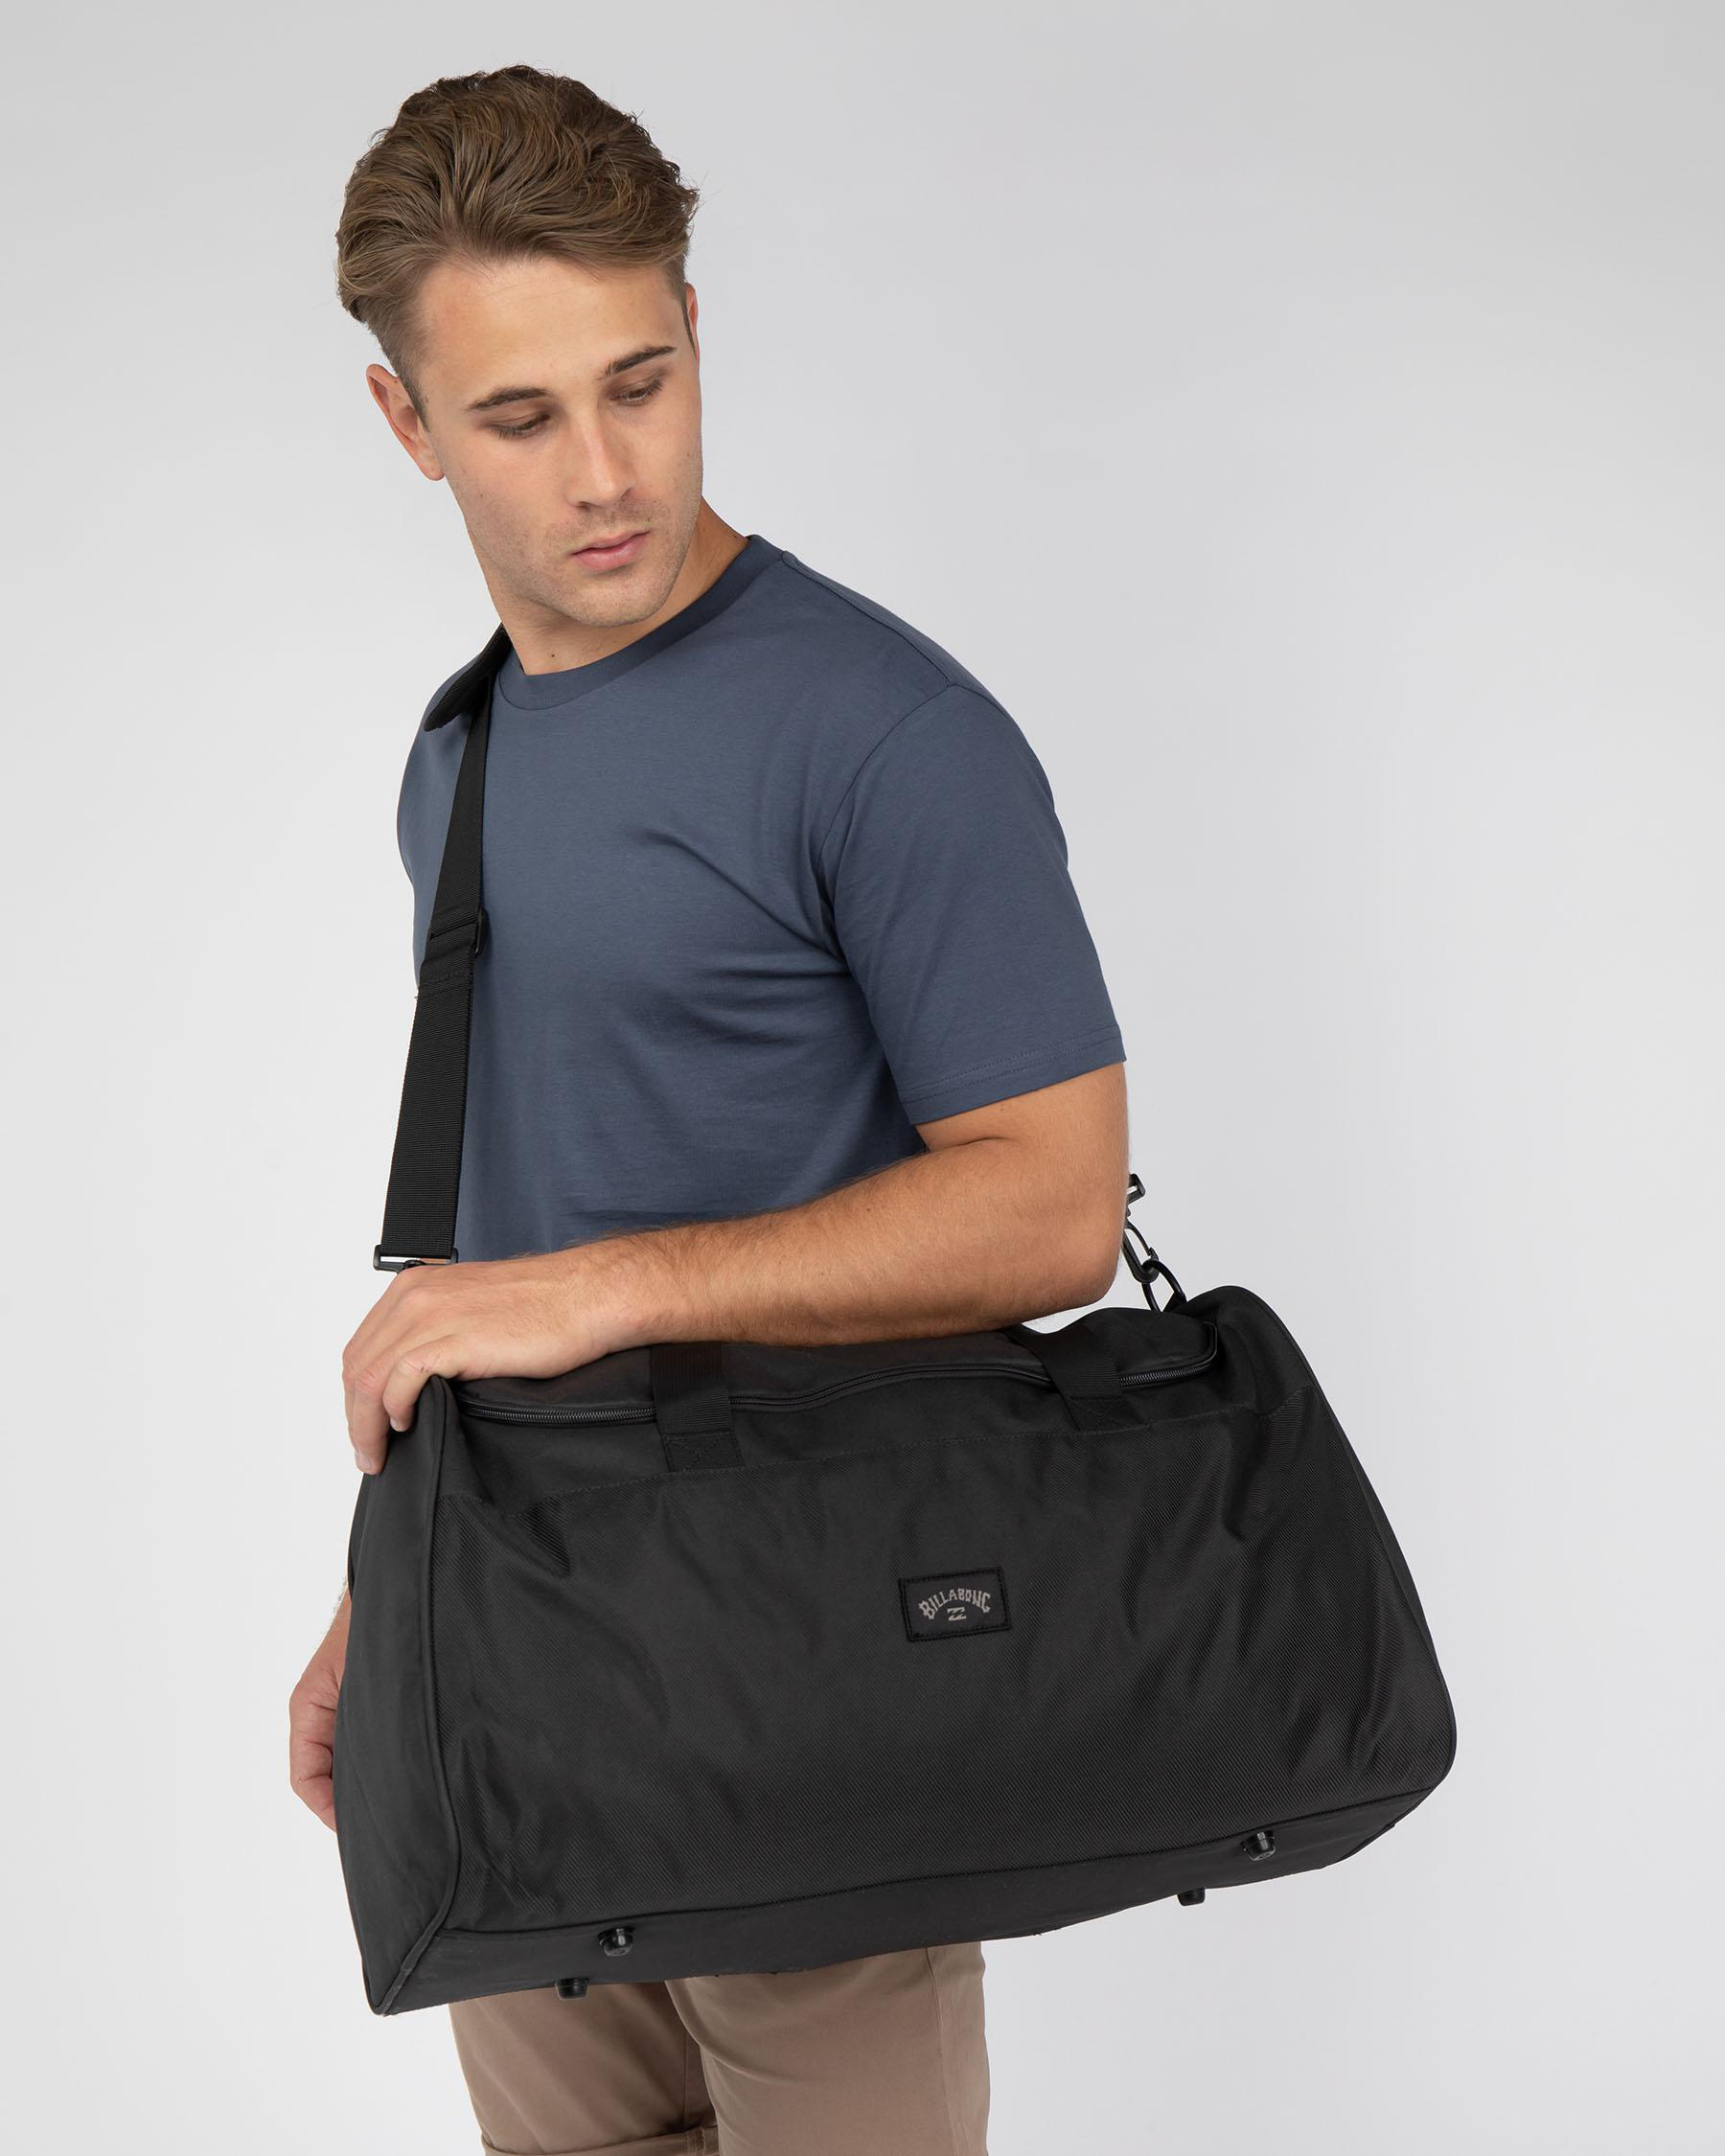 Billabong Weekender Travel Bag In Stealth - Fast Shipping & Easy ...